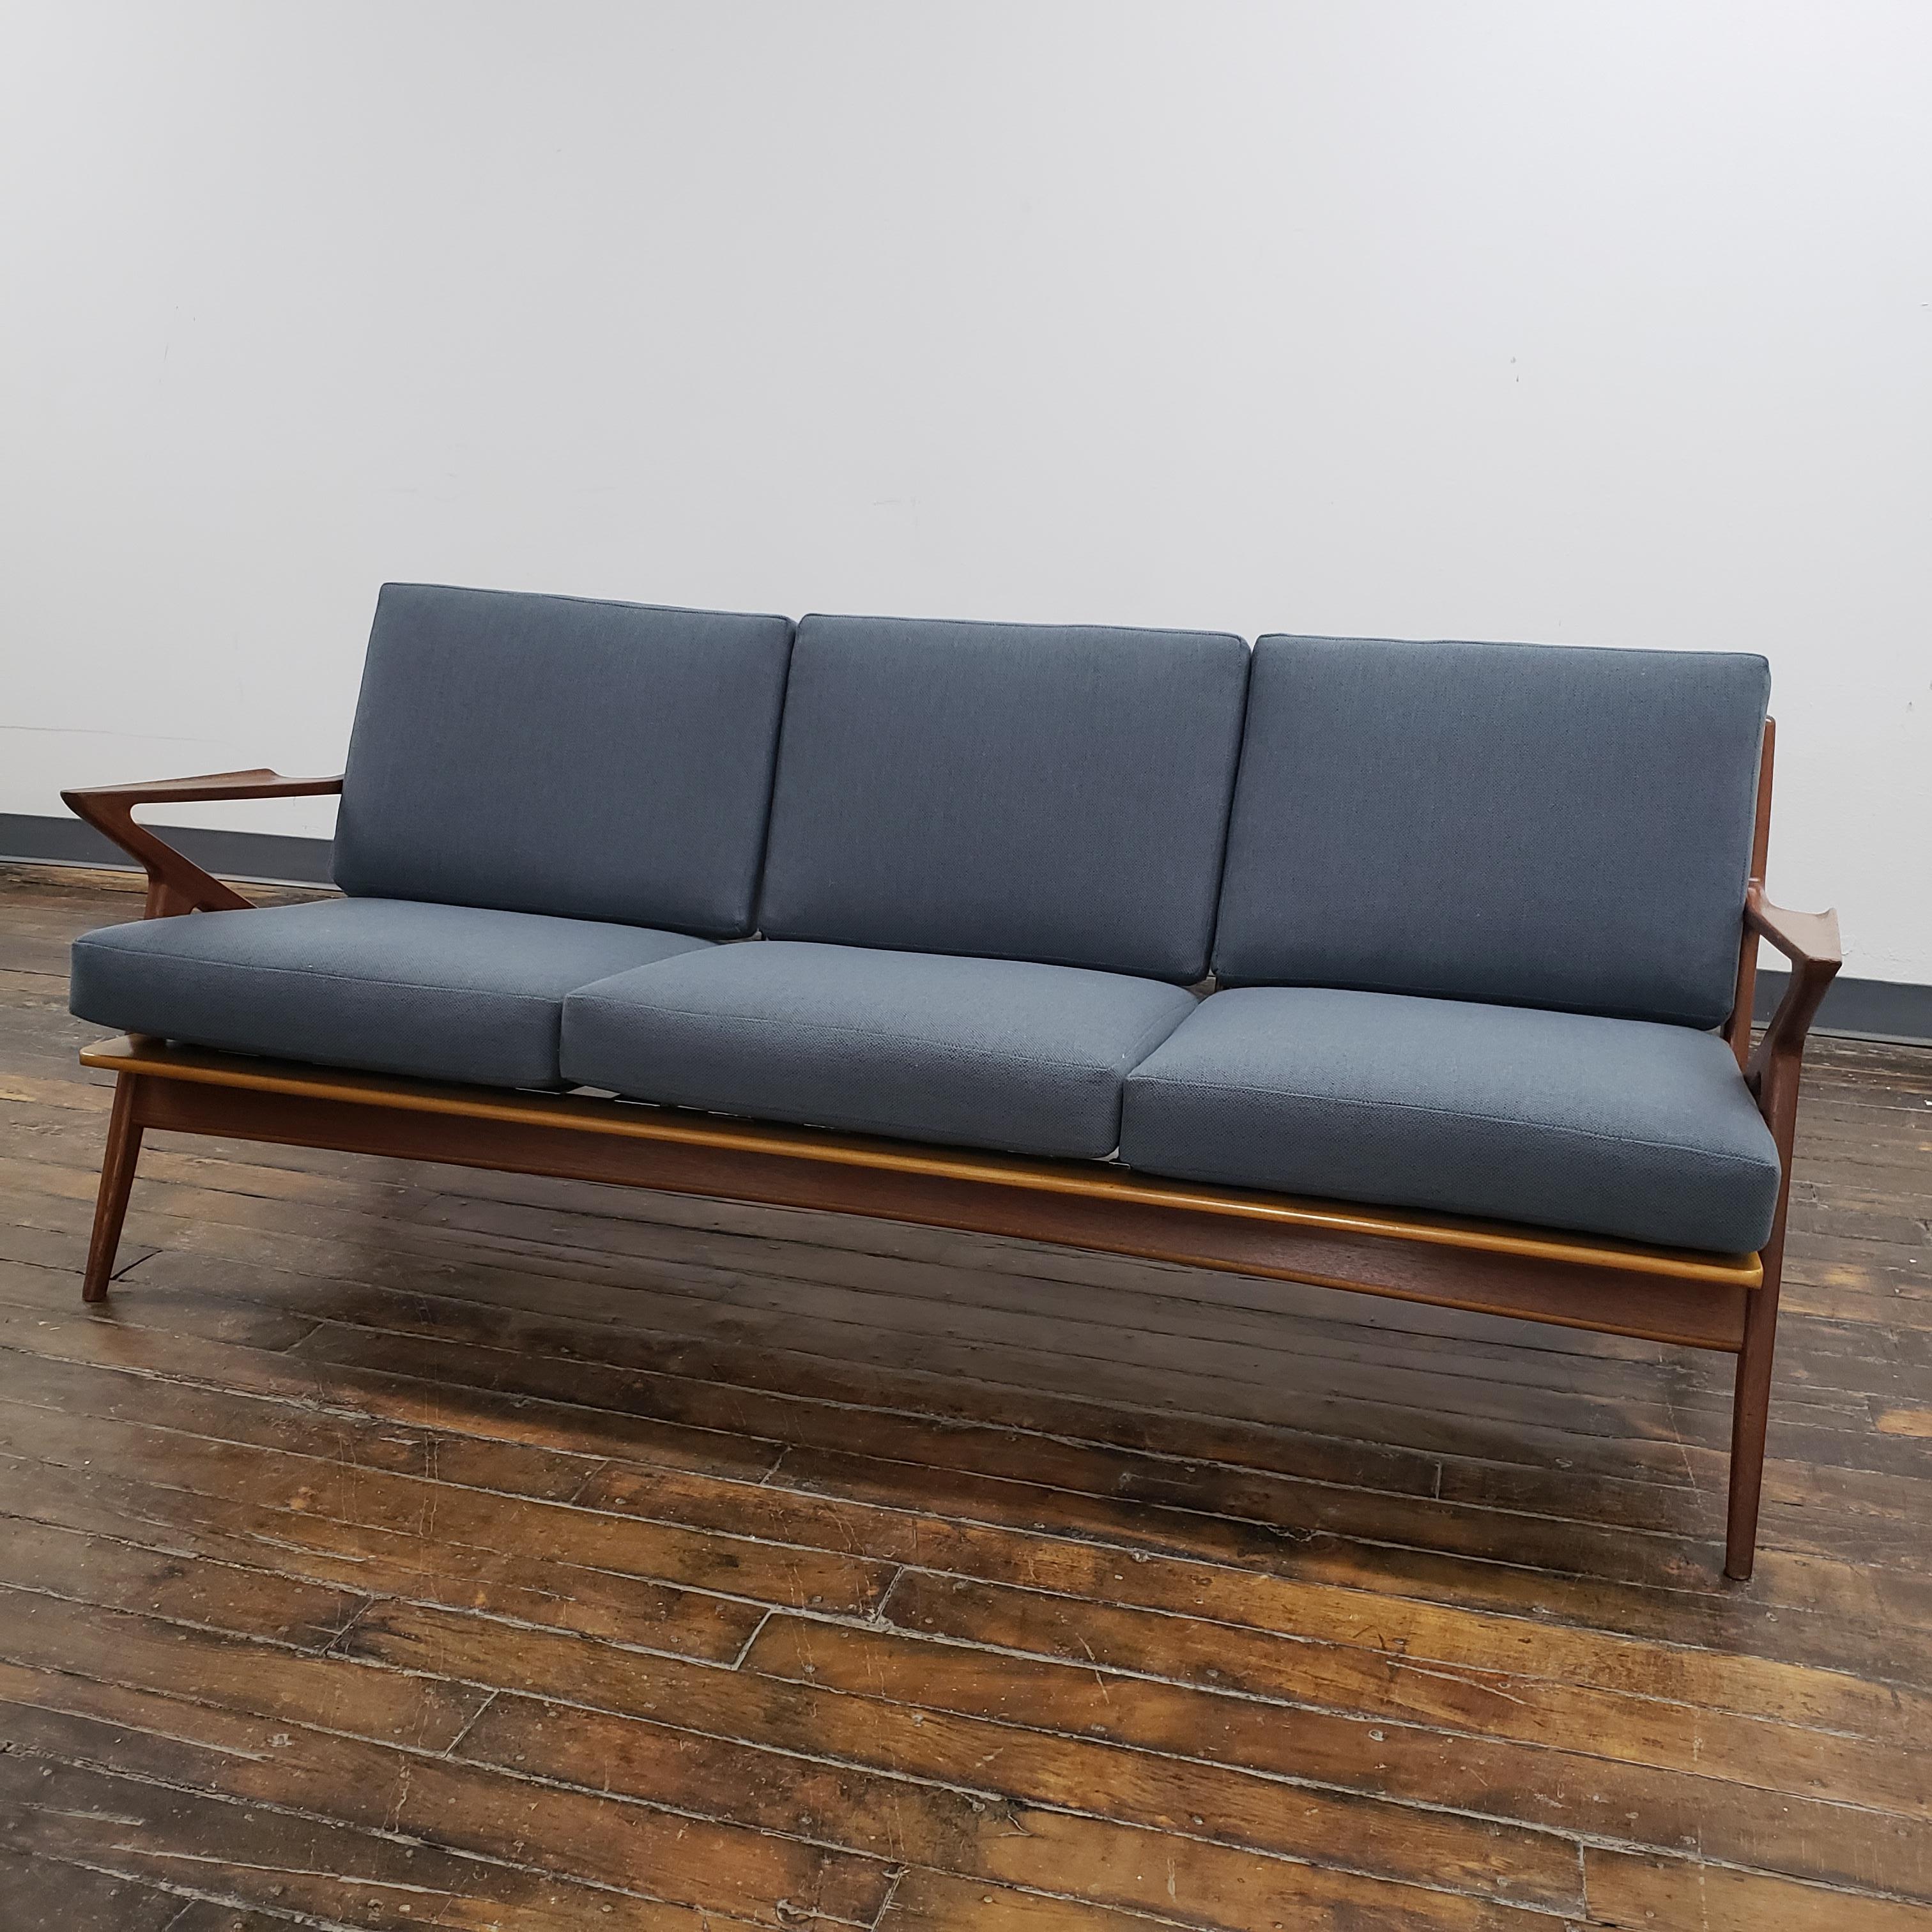 Classic Danish modern 3-seat sofa by Poul Jensen for Selig. 1960s, retains original Selig medallion, professionally refinished teak with new Evans clips and Pirelli rubber straps, new cushion inserts and new Maharam fabric.